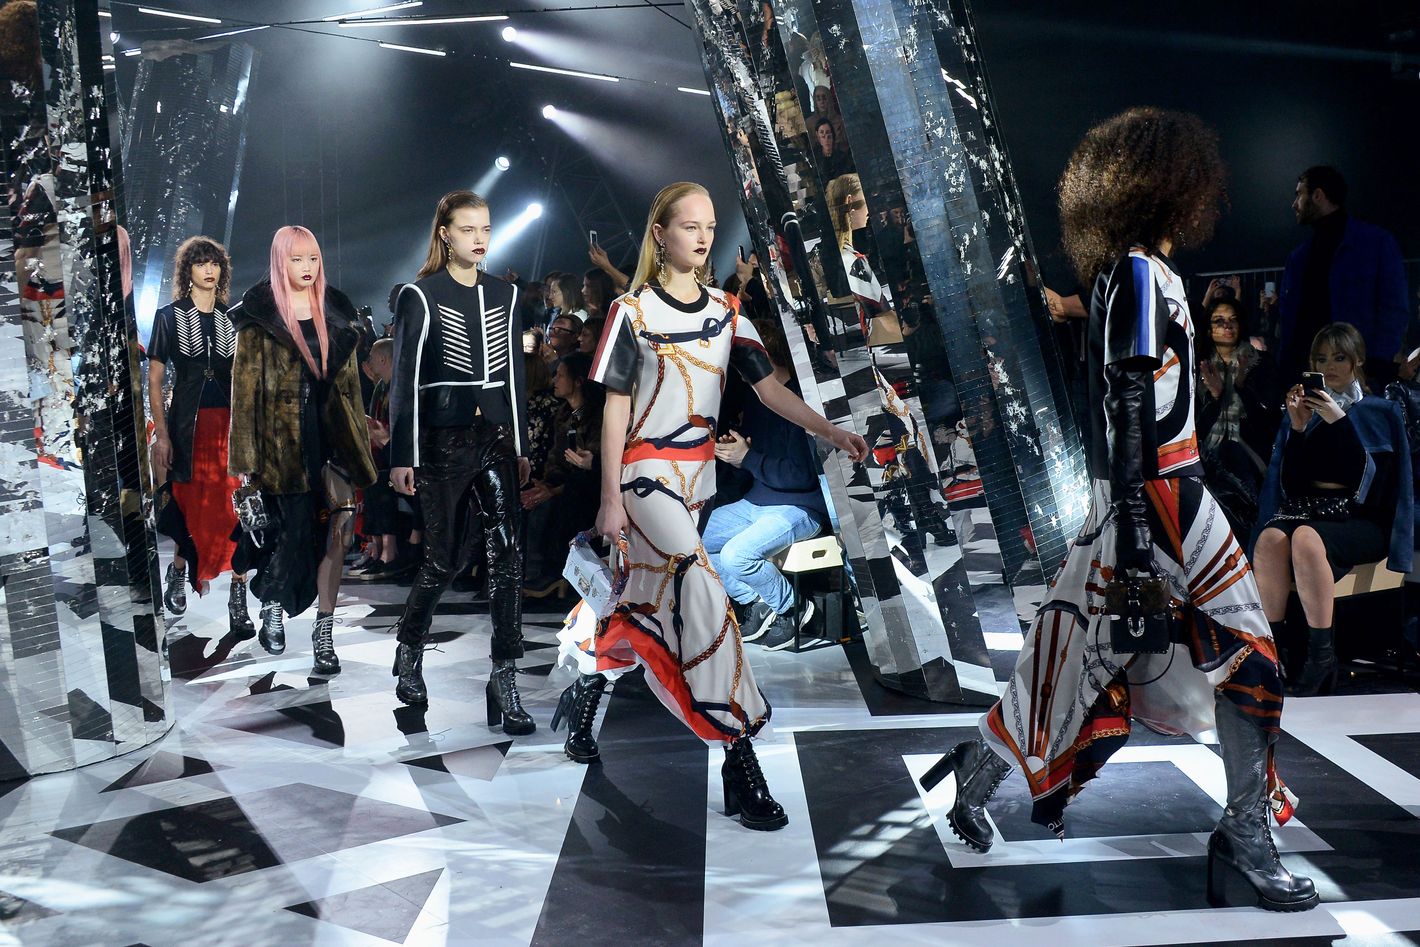 Everything You Need to Know About the Louis Vuitton Show